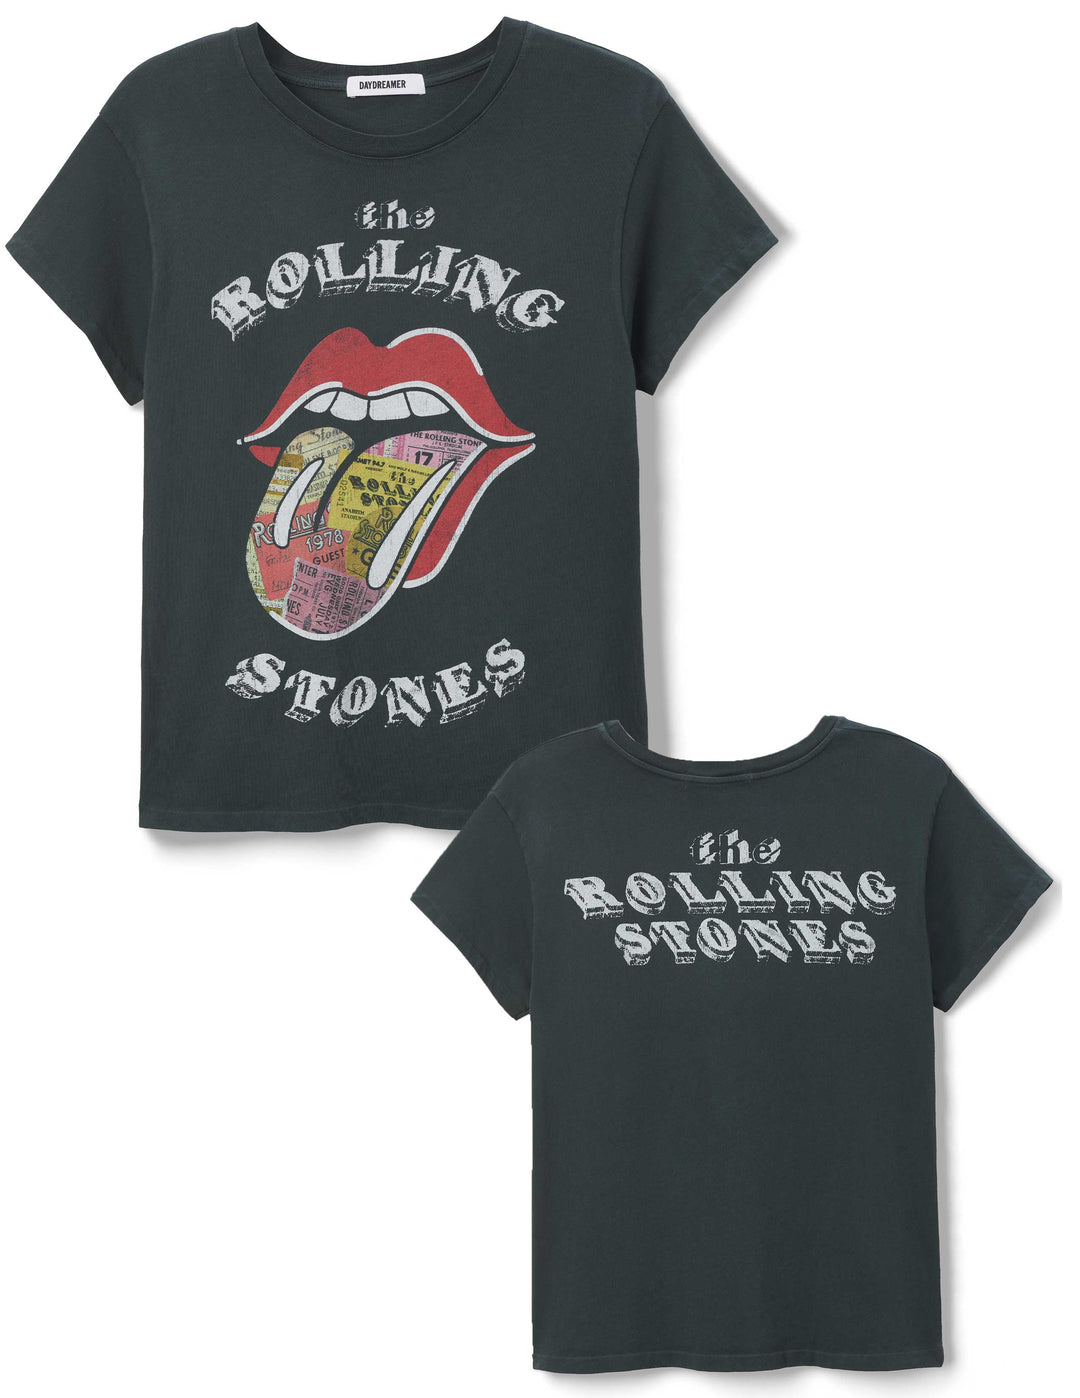 ROLLING STONES TICKET FILL TONGUE TOUR TEE-VINTAGE BLACK - Kingfisher Road - Online Boutique